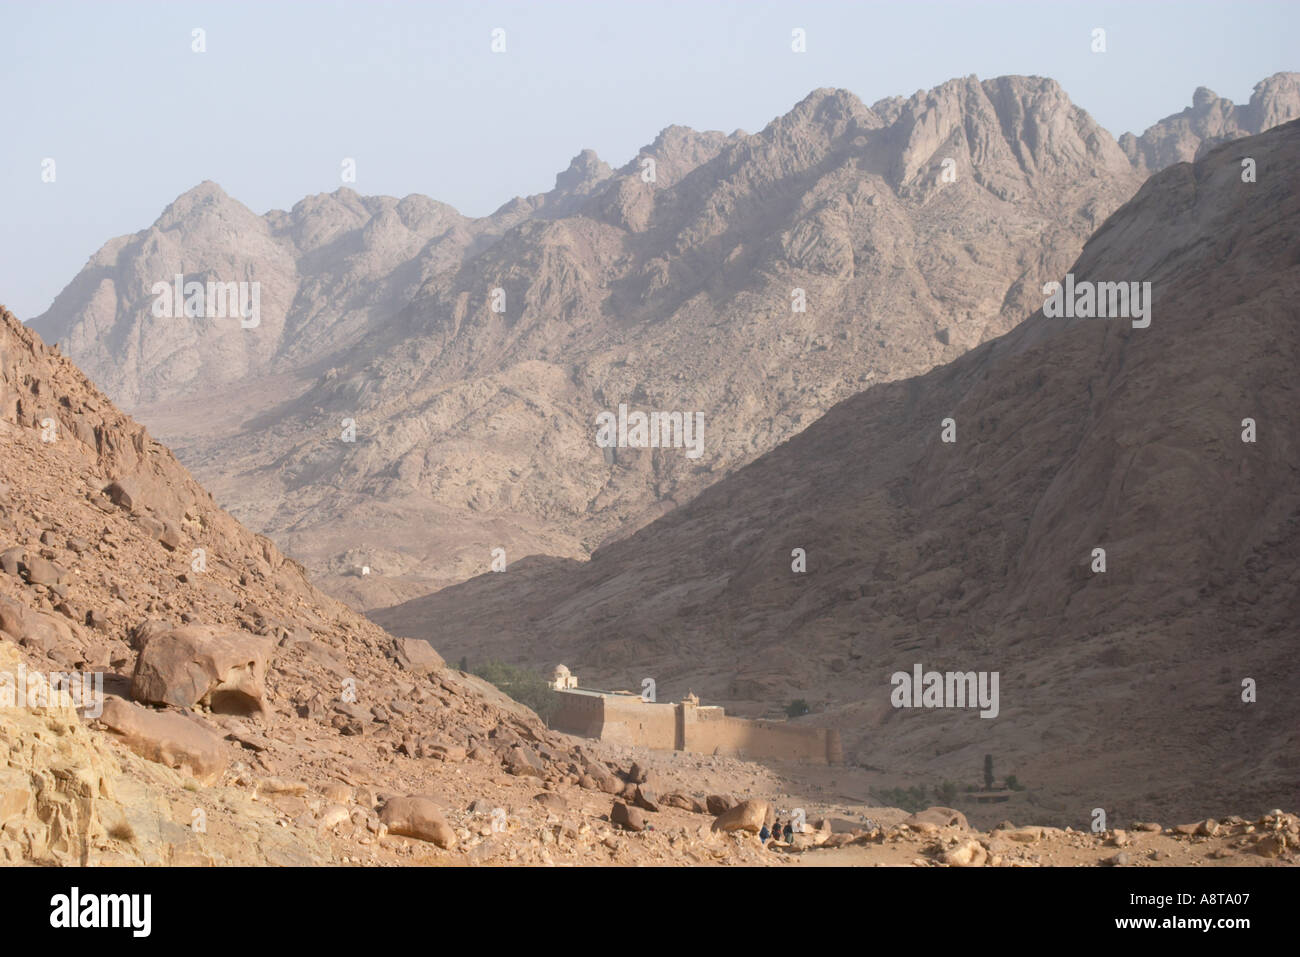 St Catherine s Monestry at the foot of Mount Sinai Gebal Musa Stock Photo